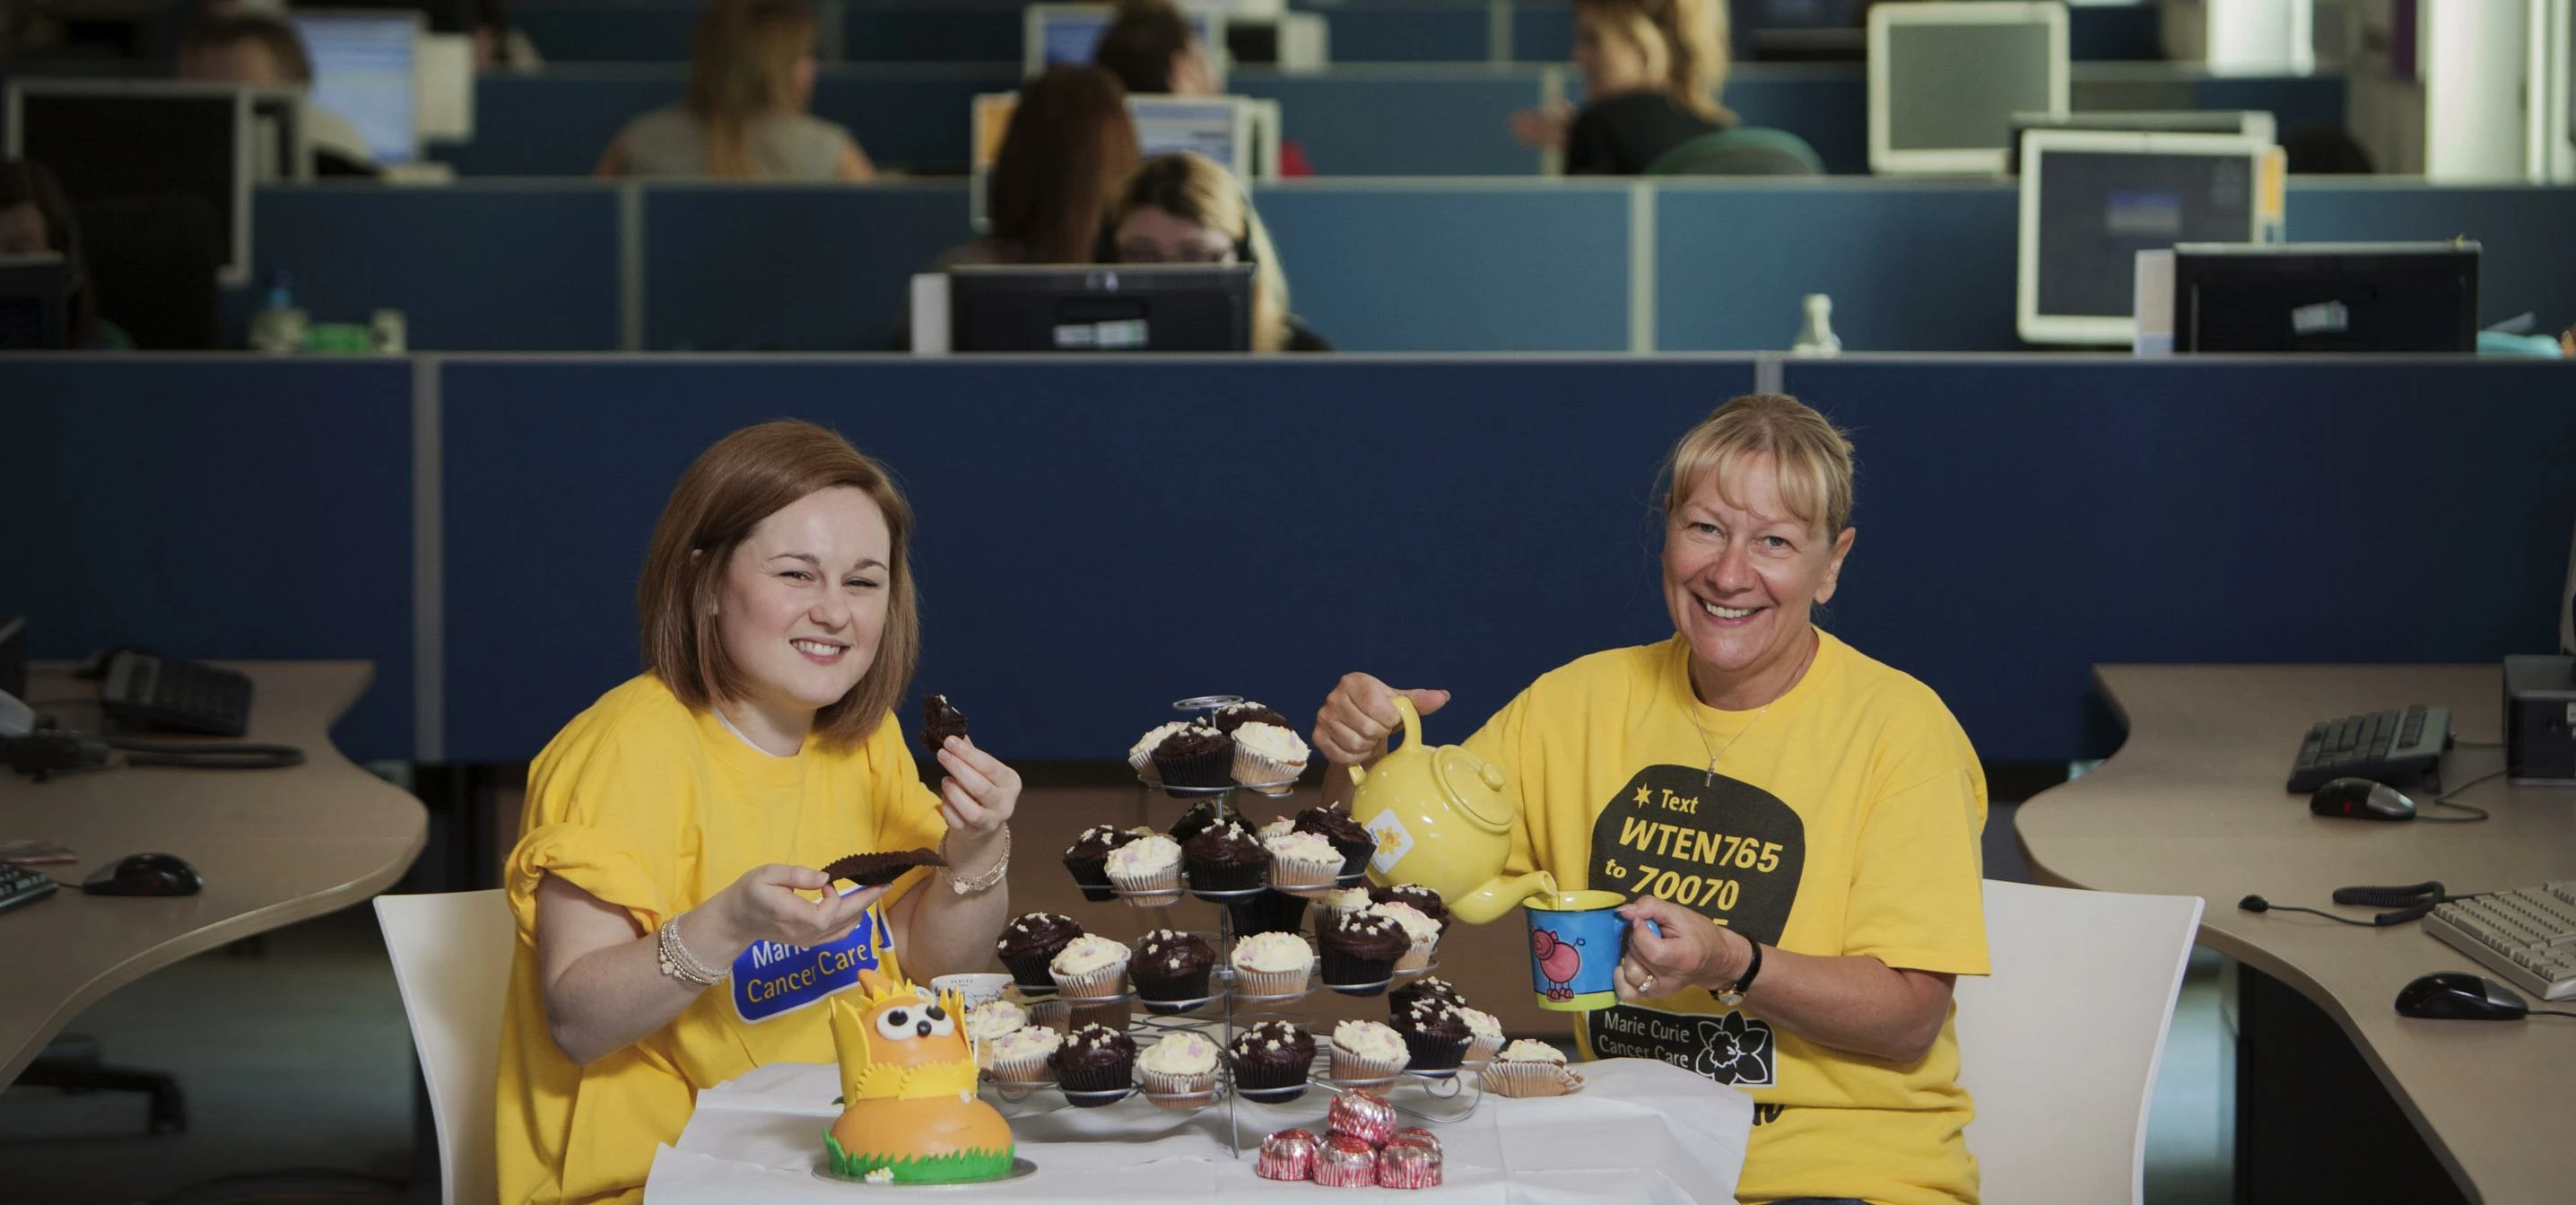 EDF Energy workers raise money for charity 